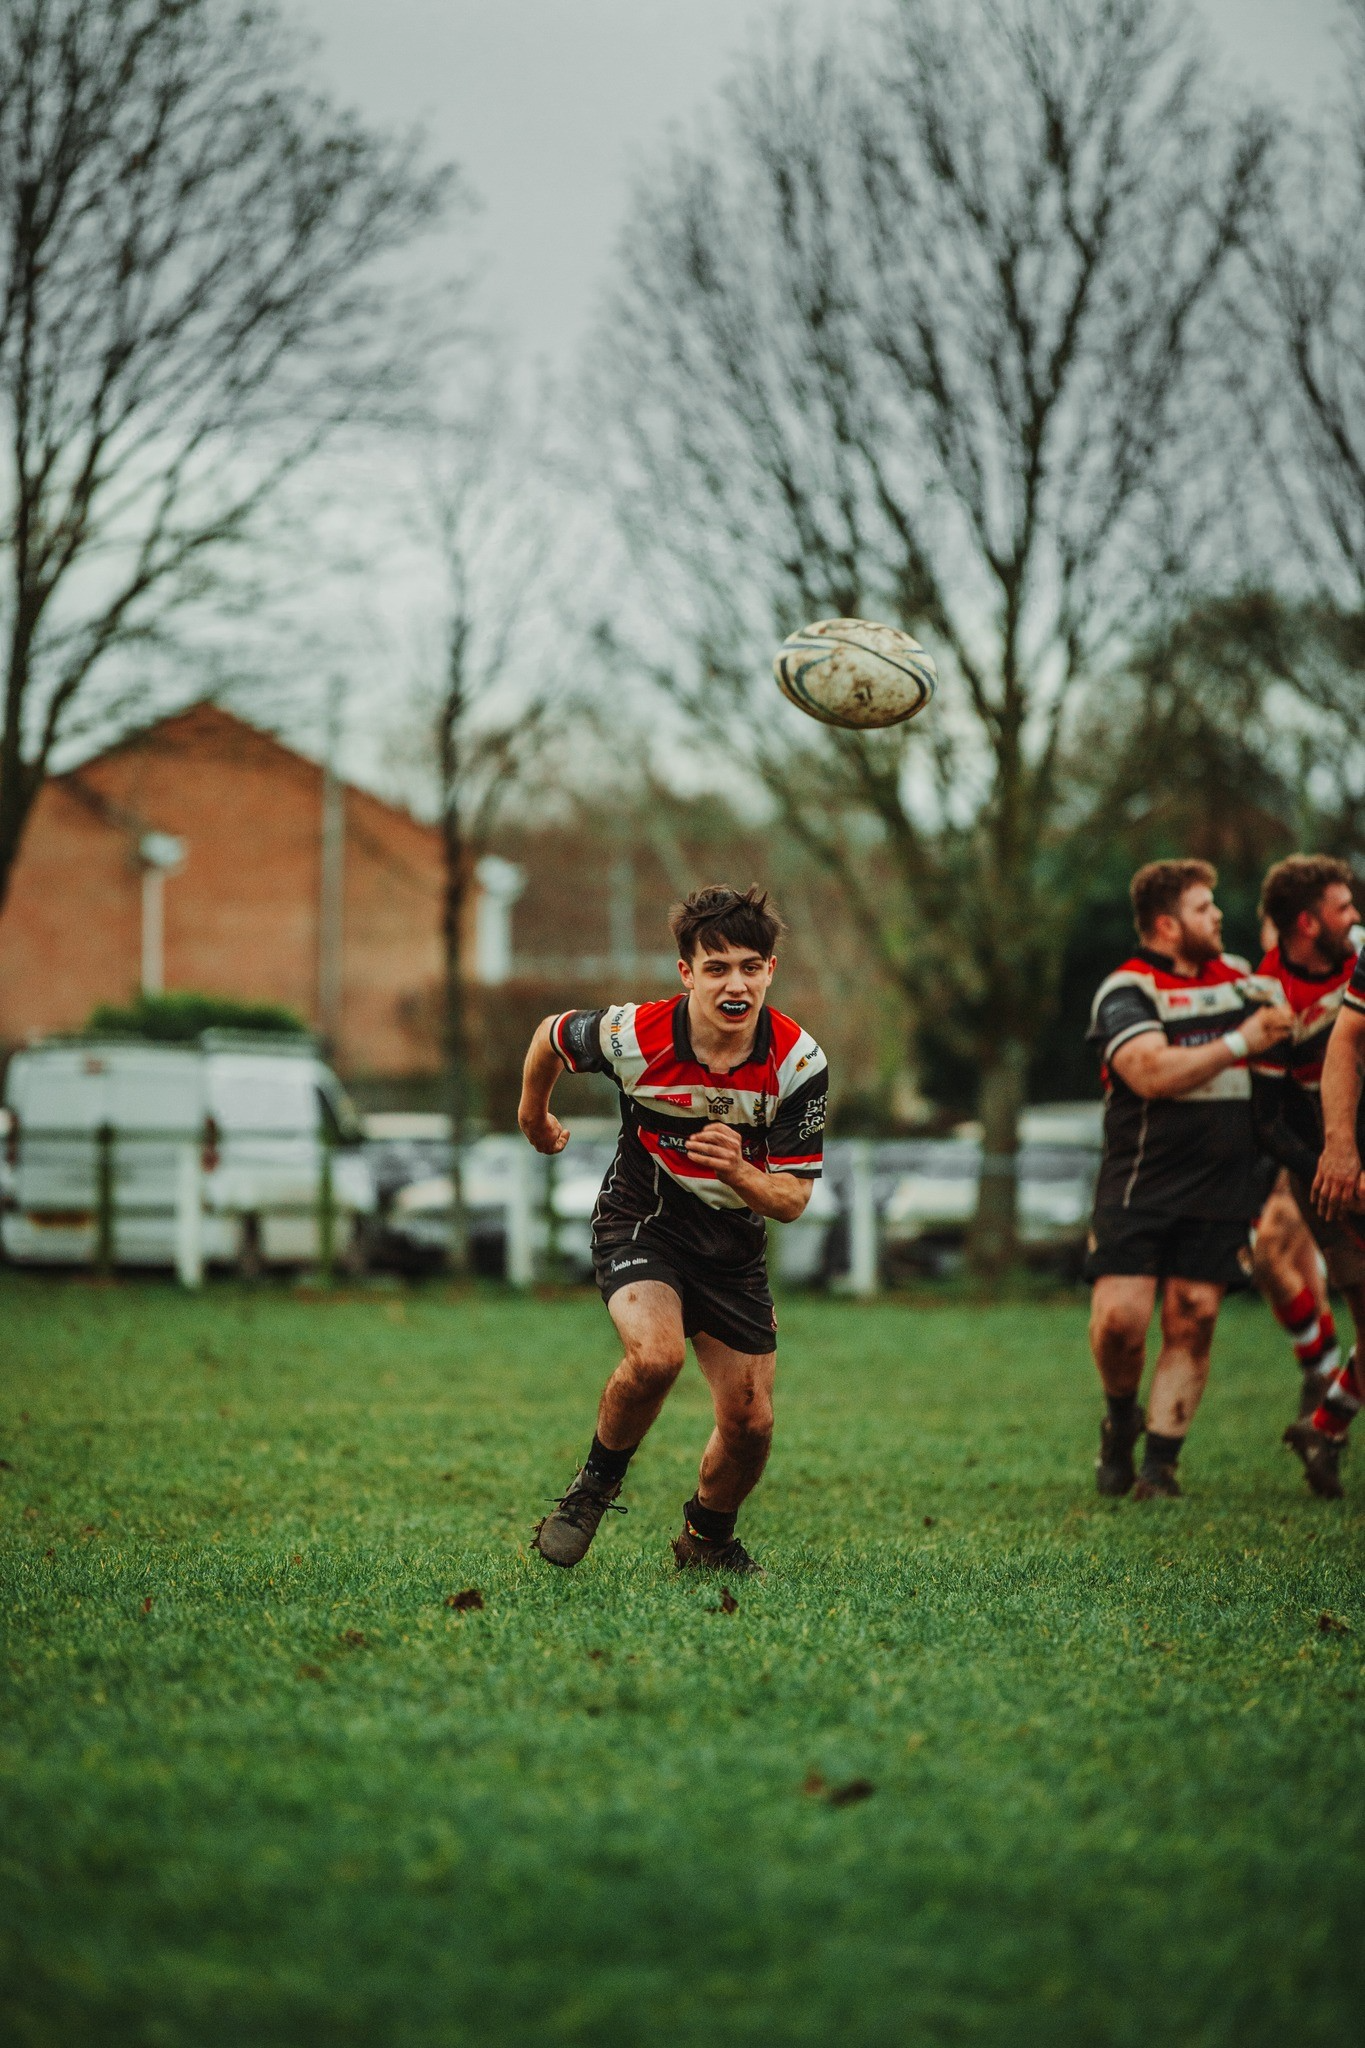 The Frome RFC team in action (image Nick Perry)